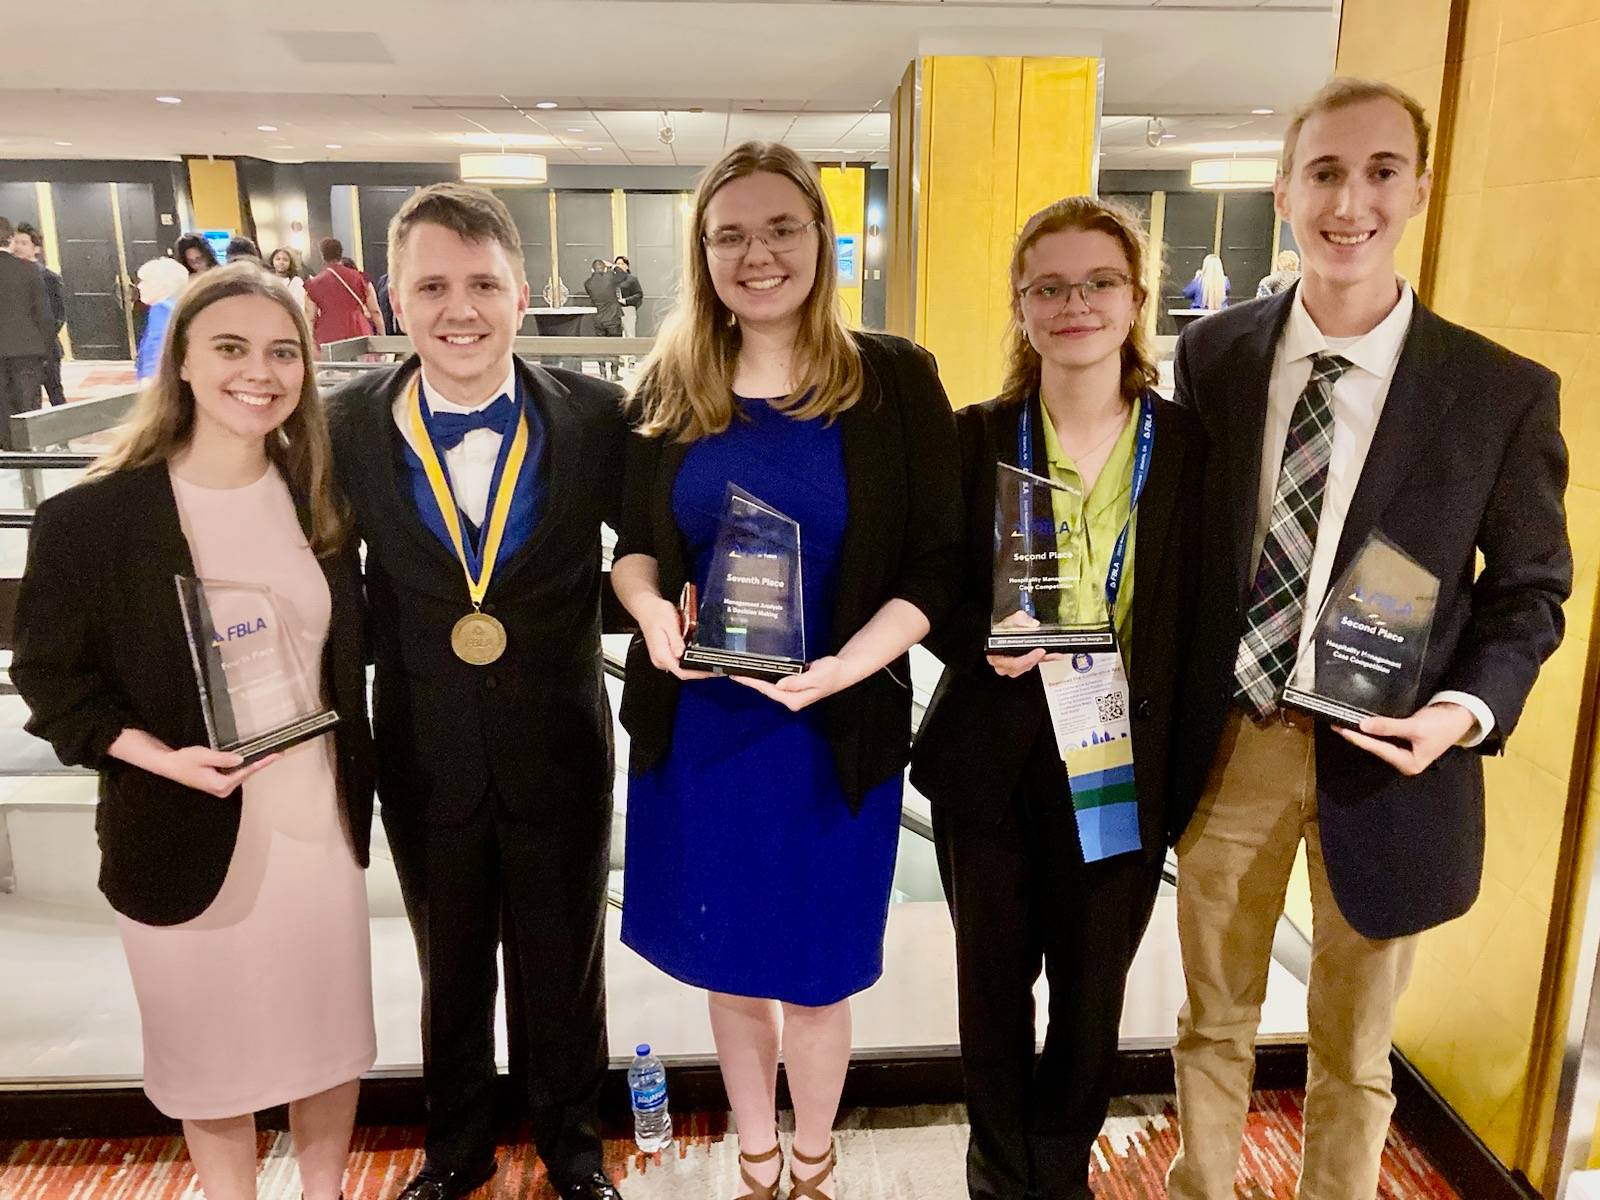 5 Students Holding Awards After Conference